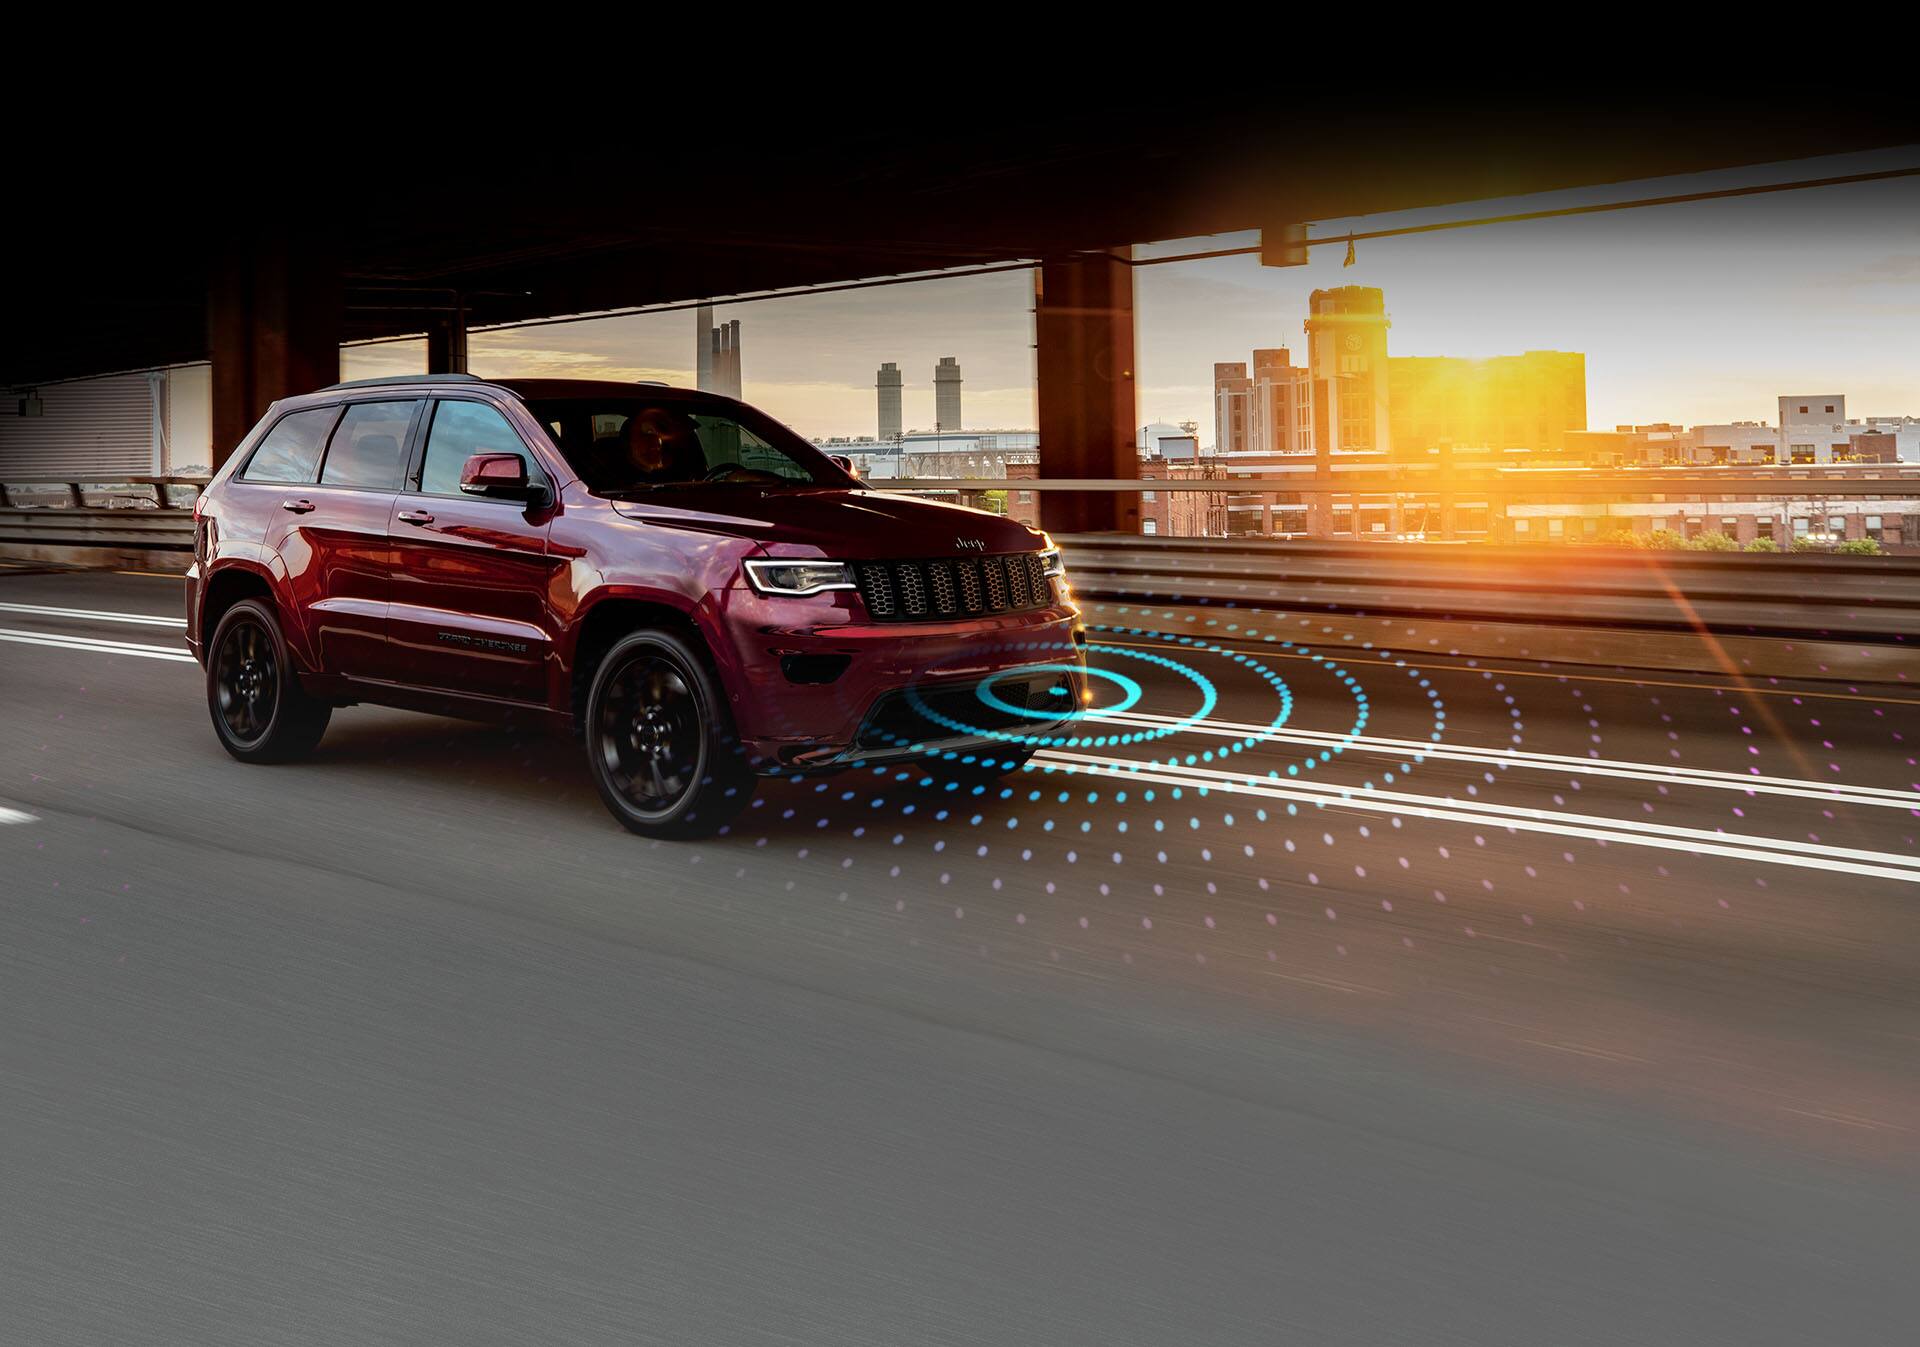 The 2022 Jeep Grand Cherokee WK Laredo X with the Altitude Appearance Package and illustrated sensor bars emanating from its front end as it's driven on an empty road.